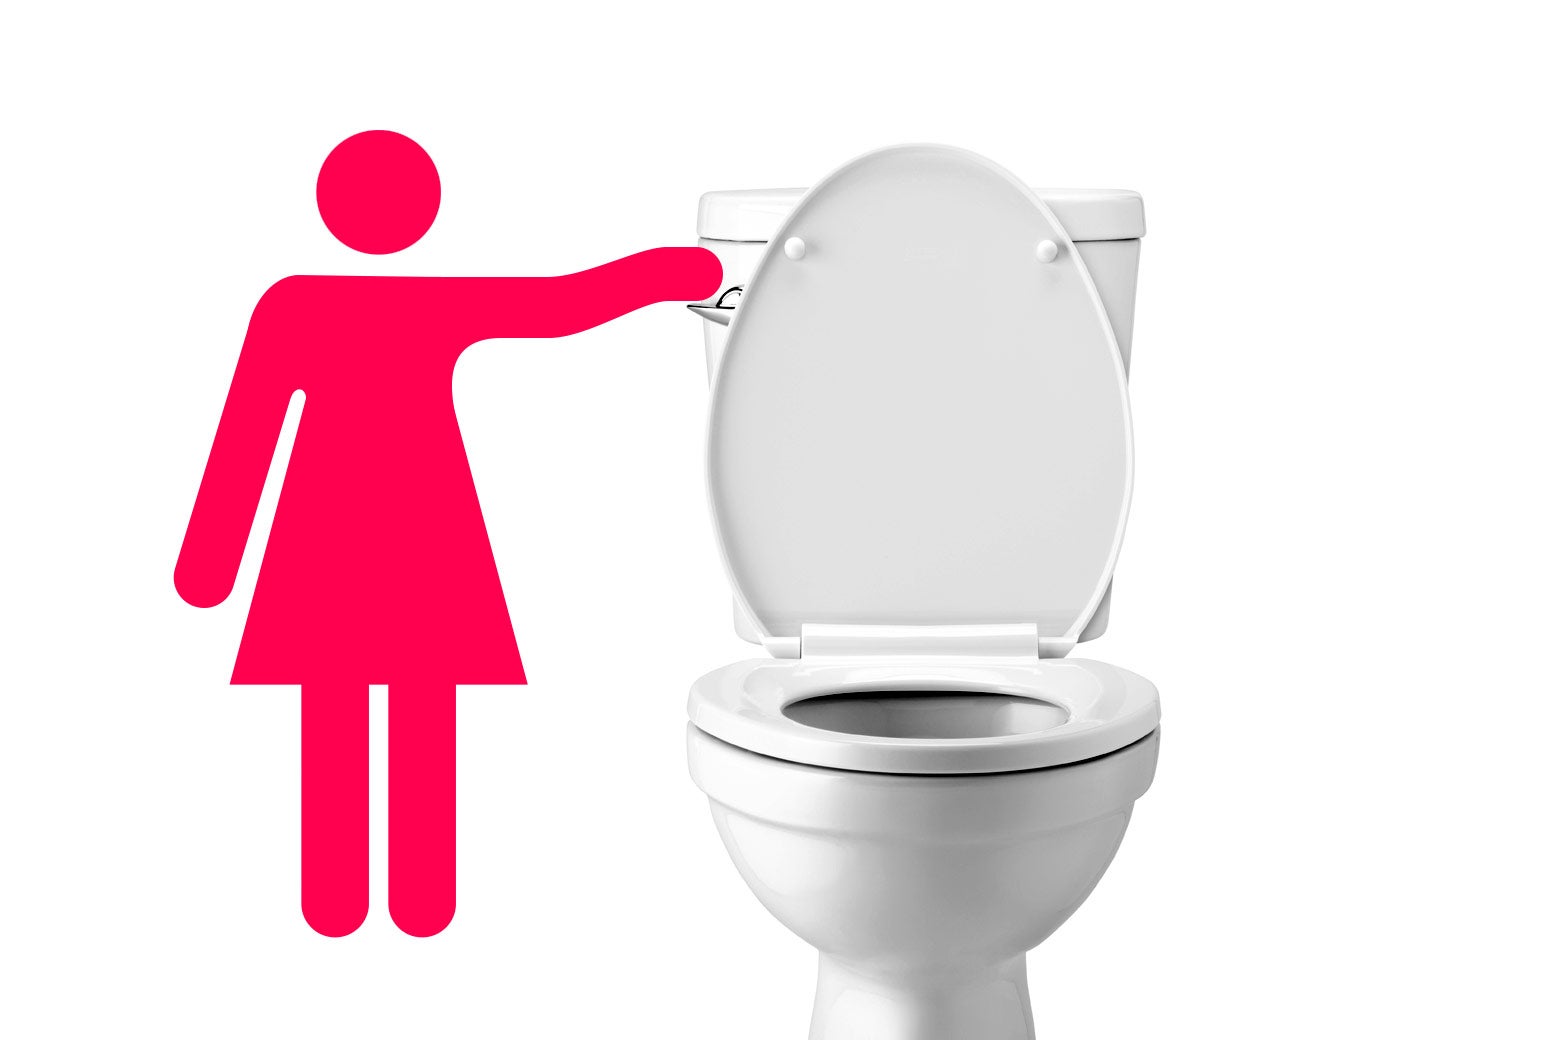 toilet being flushed by the bathroom sign symbol for "female/woman"